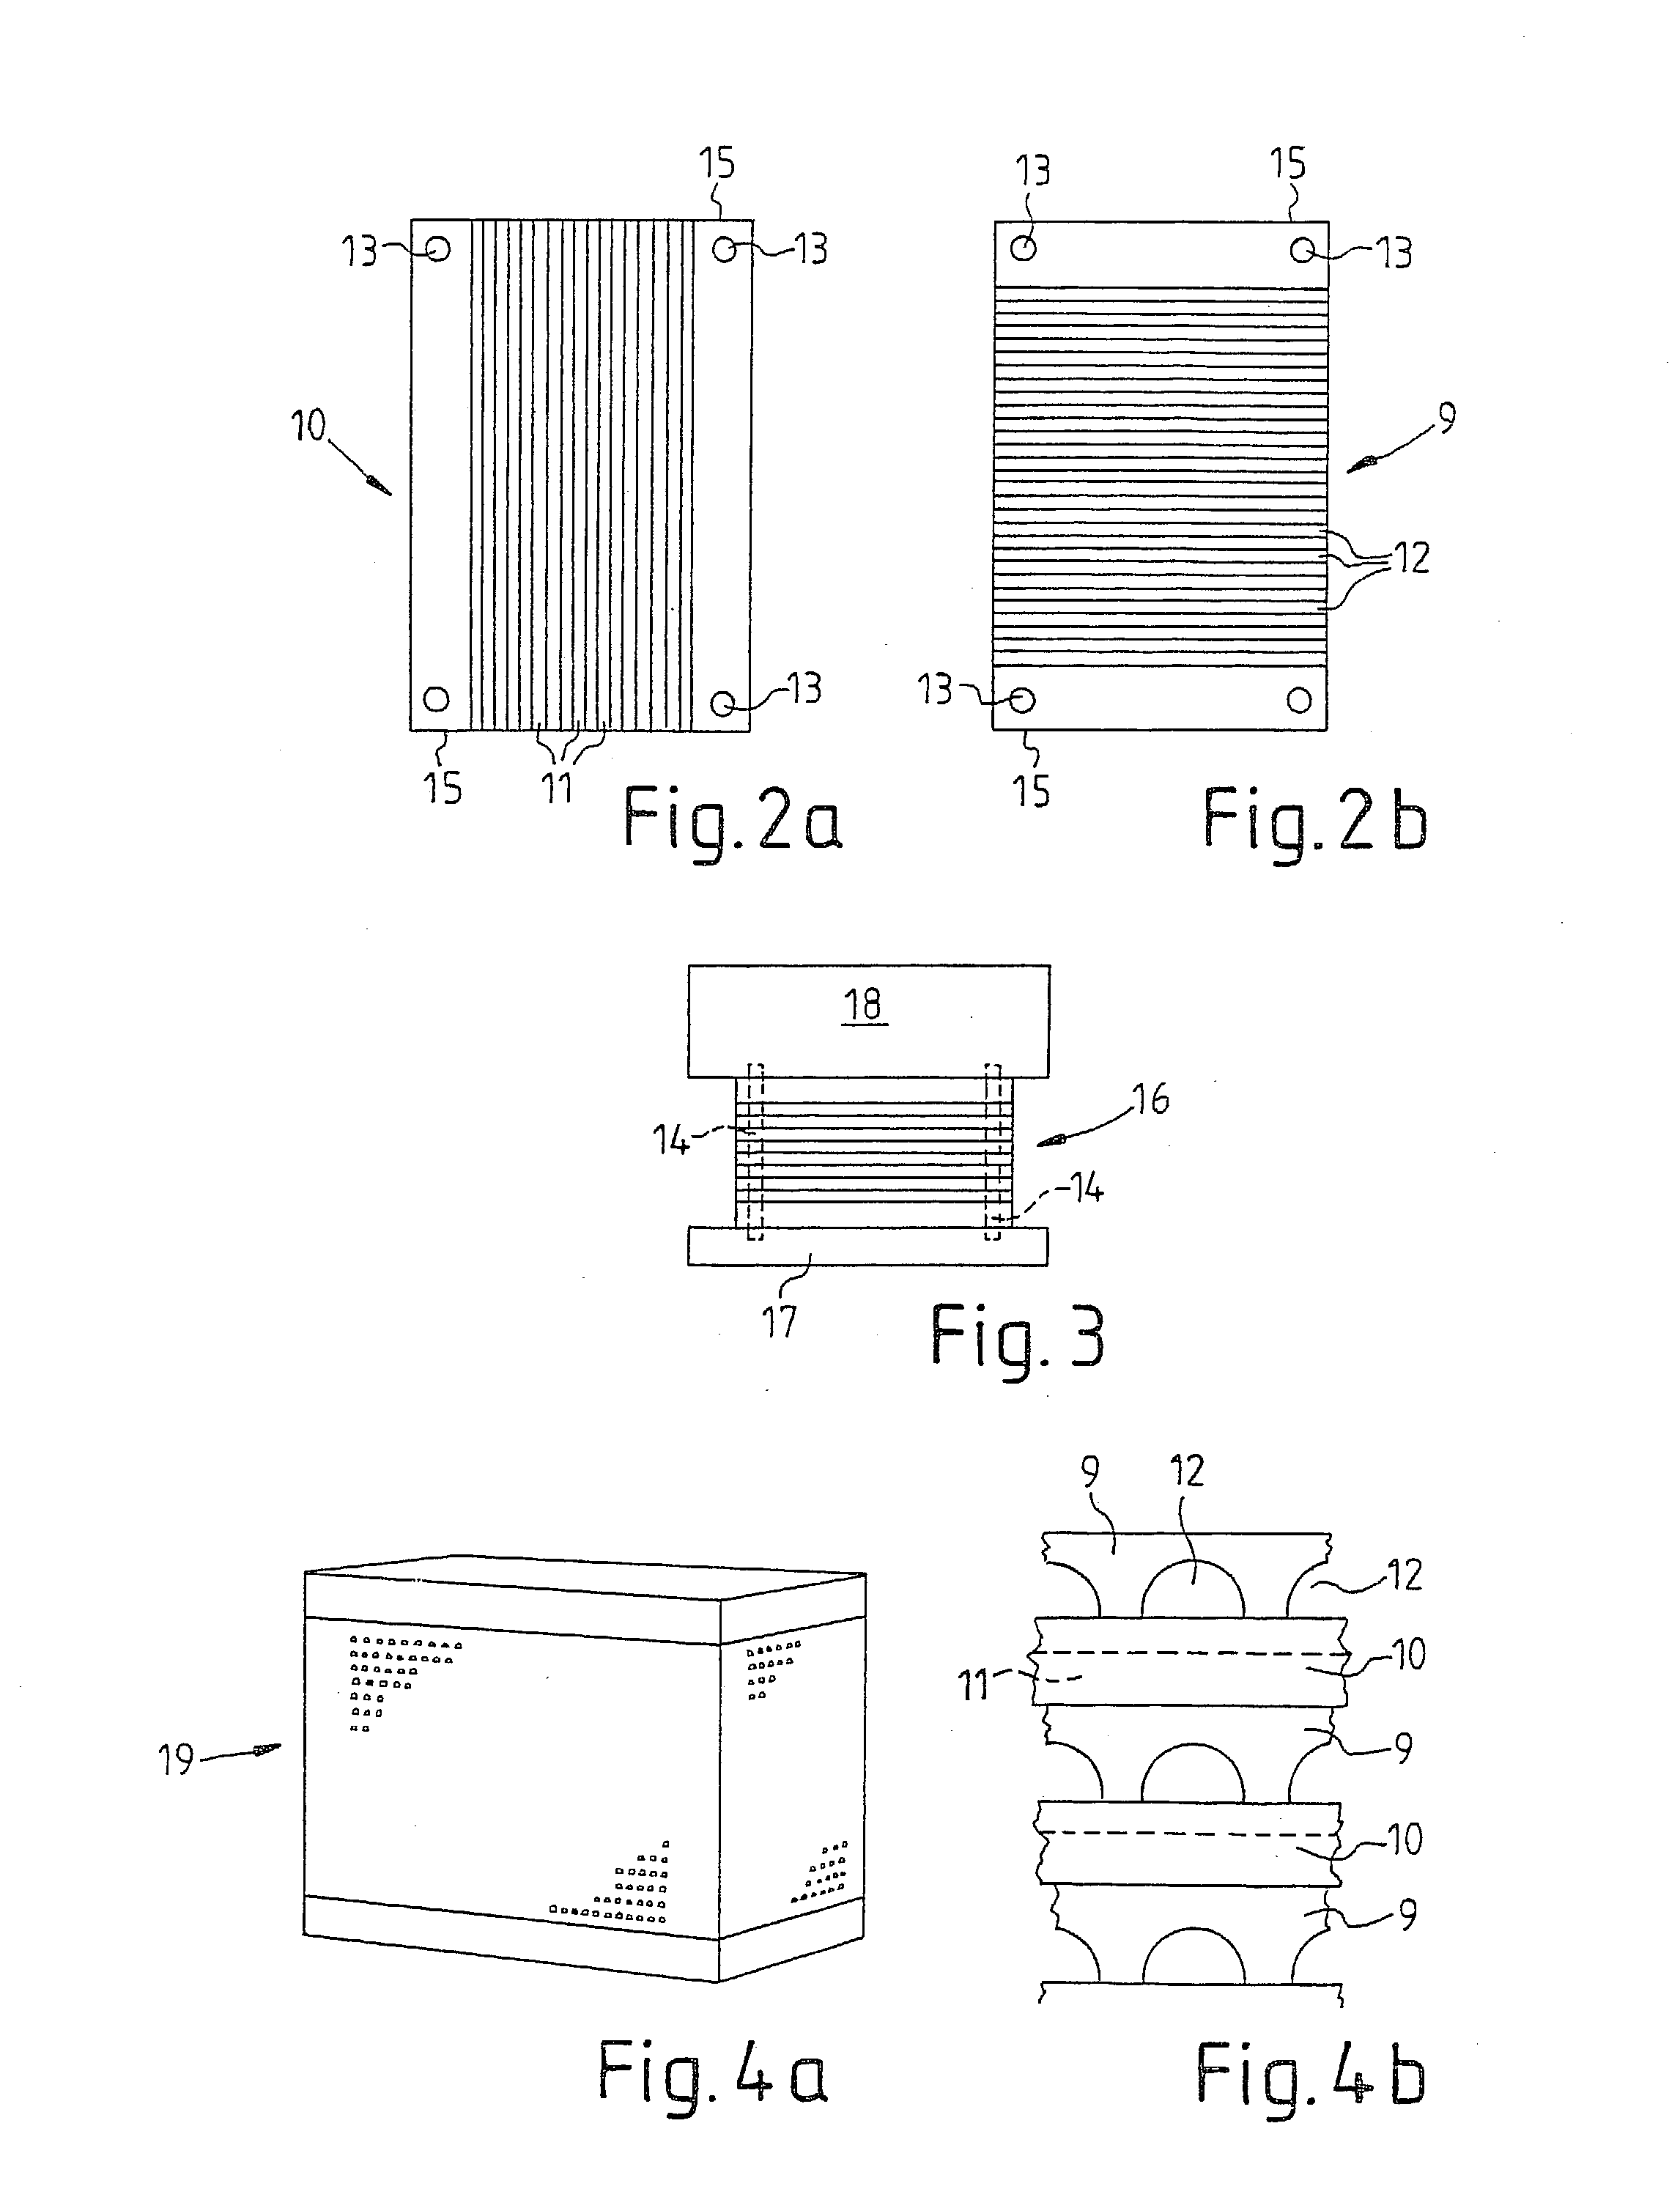 Method for producing a structural member from plates stacked on top of each other and soldered together